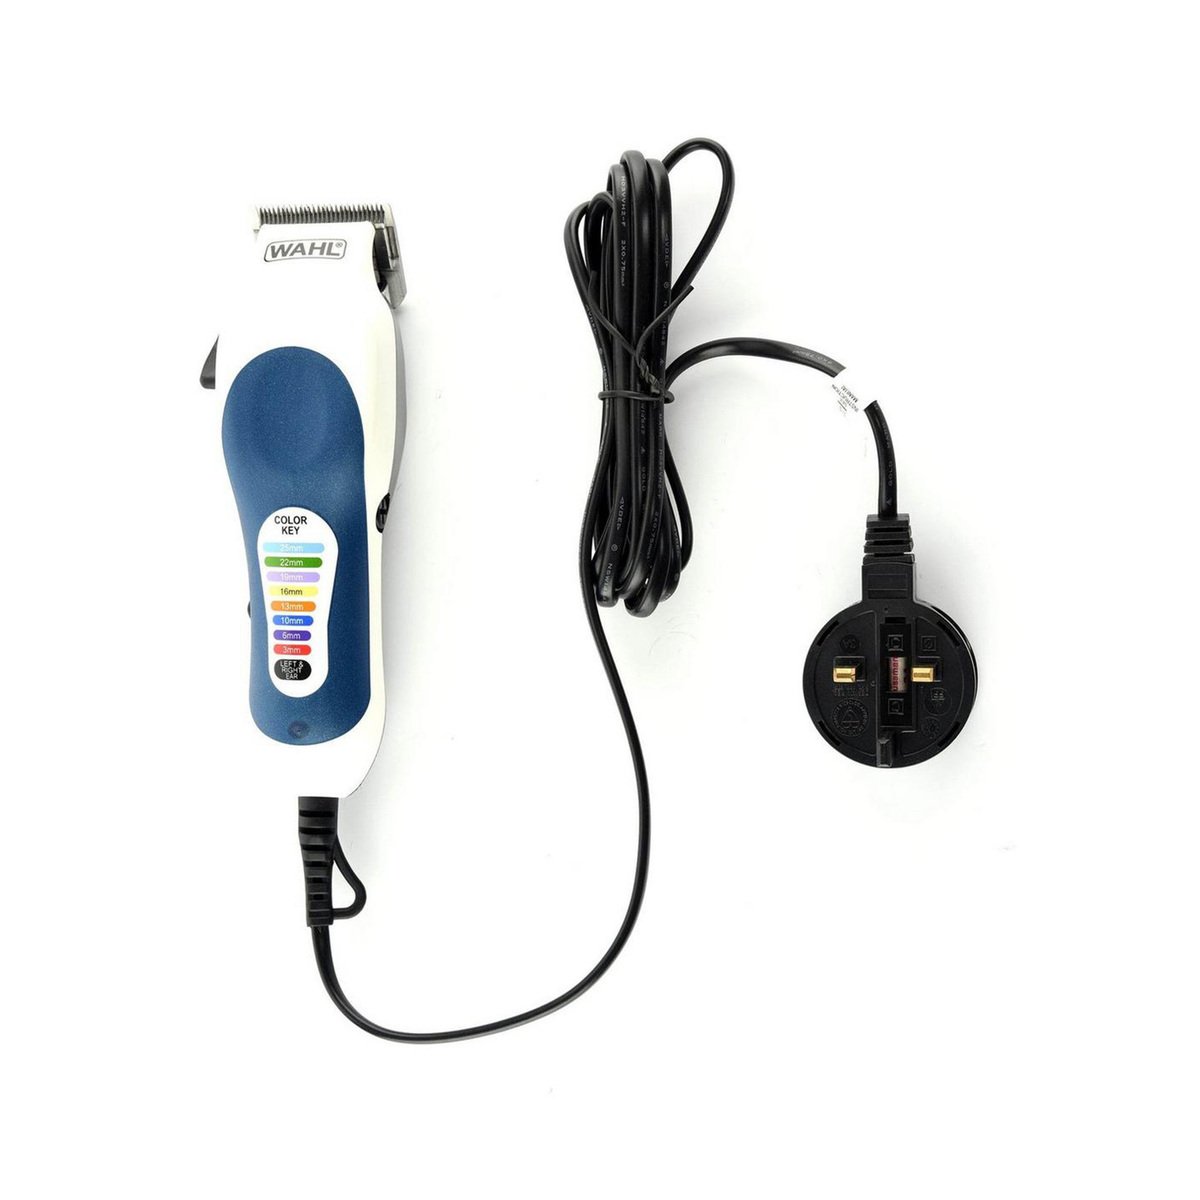 Wahl Hair Trimmer 79400-637